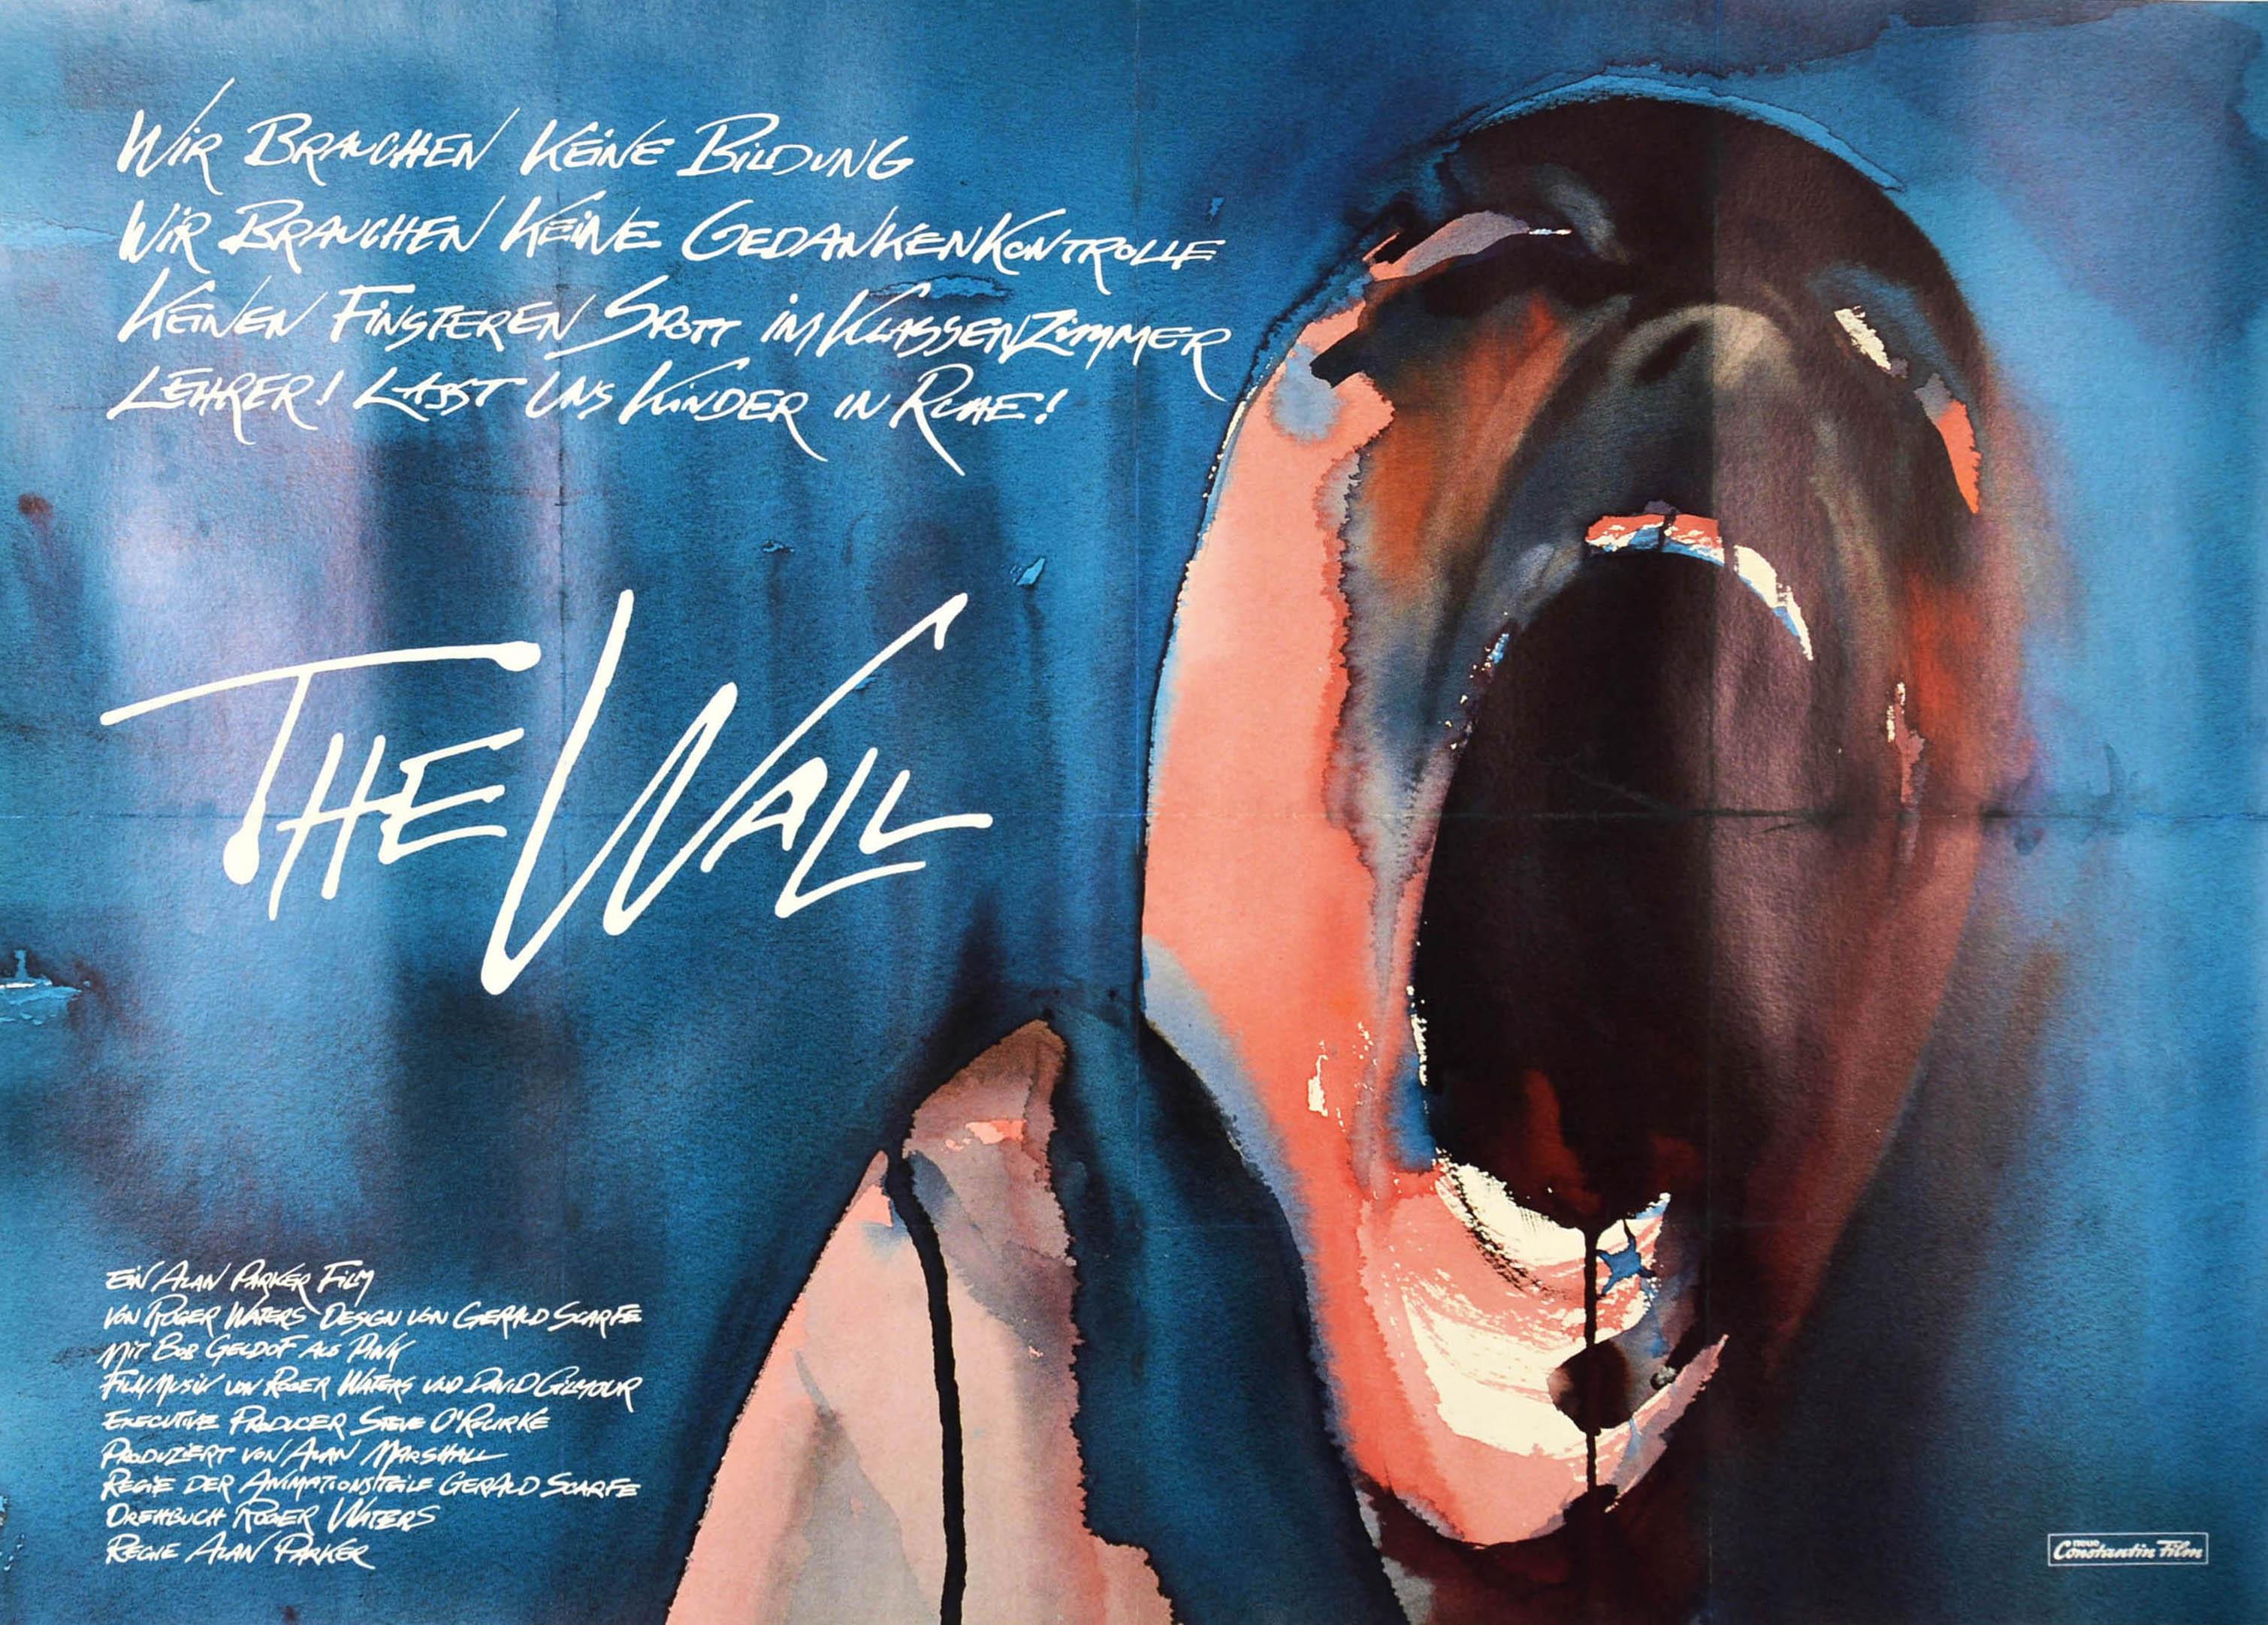 Gerald Scarfe Print - Original Vintage Poster Pink Floyd Another Brick In The Wall Rock Music Film Art